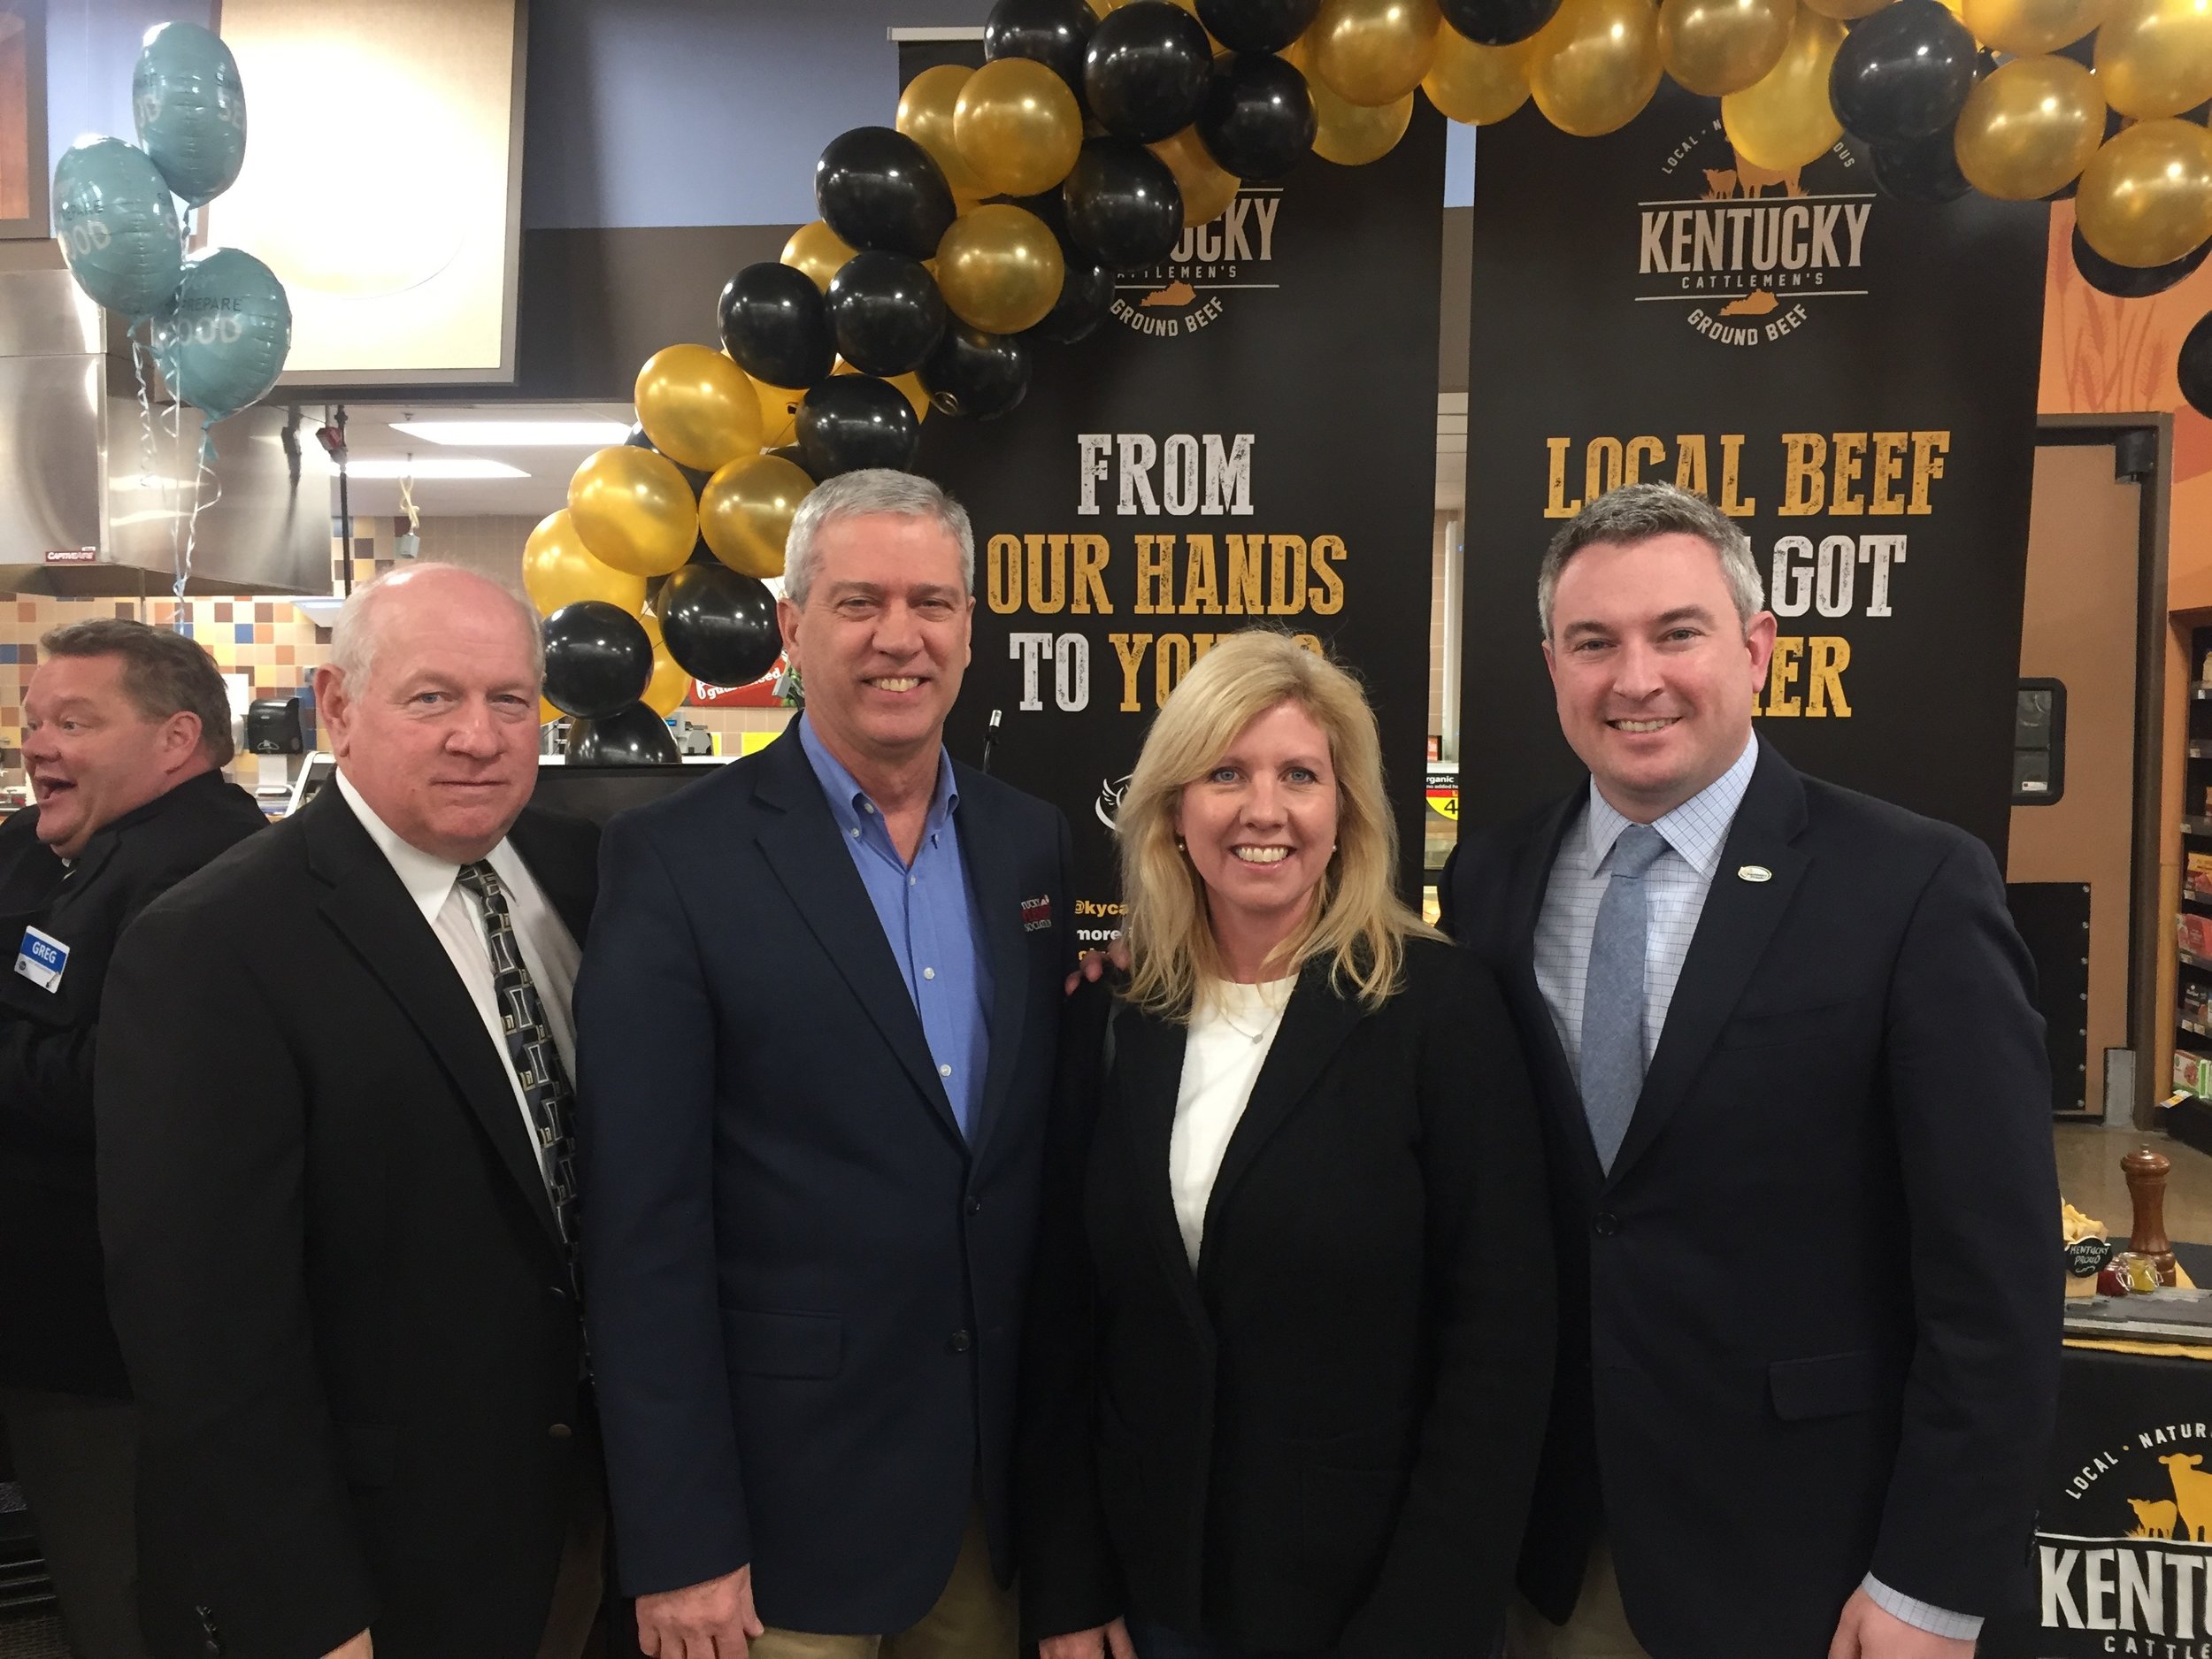 Warren Beeler (GOAP), Bobby Foree (KCA President), Laura Knoth (KyCorn), and Commissioner Ryan Quarles (KDA) at a Kroger/Kentucky Cattlemen's Ground Beef event in Louisville.&nbsp;